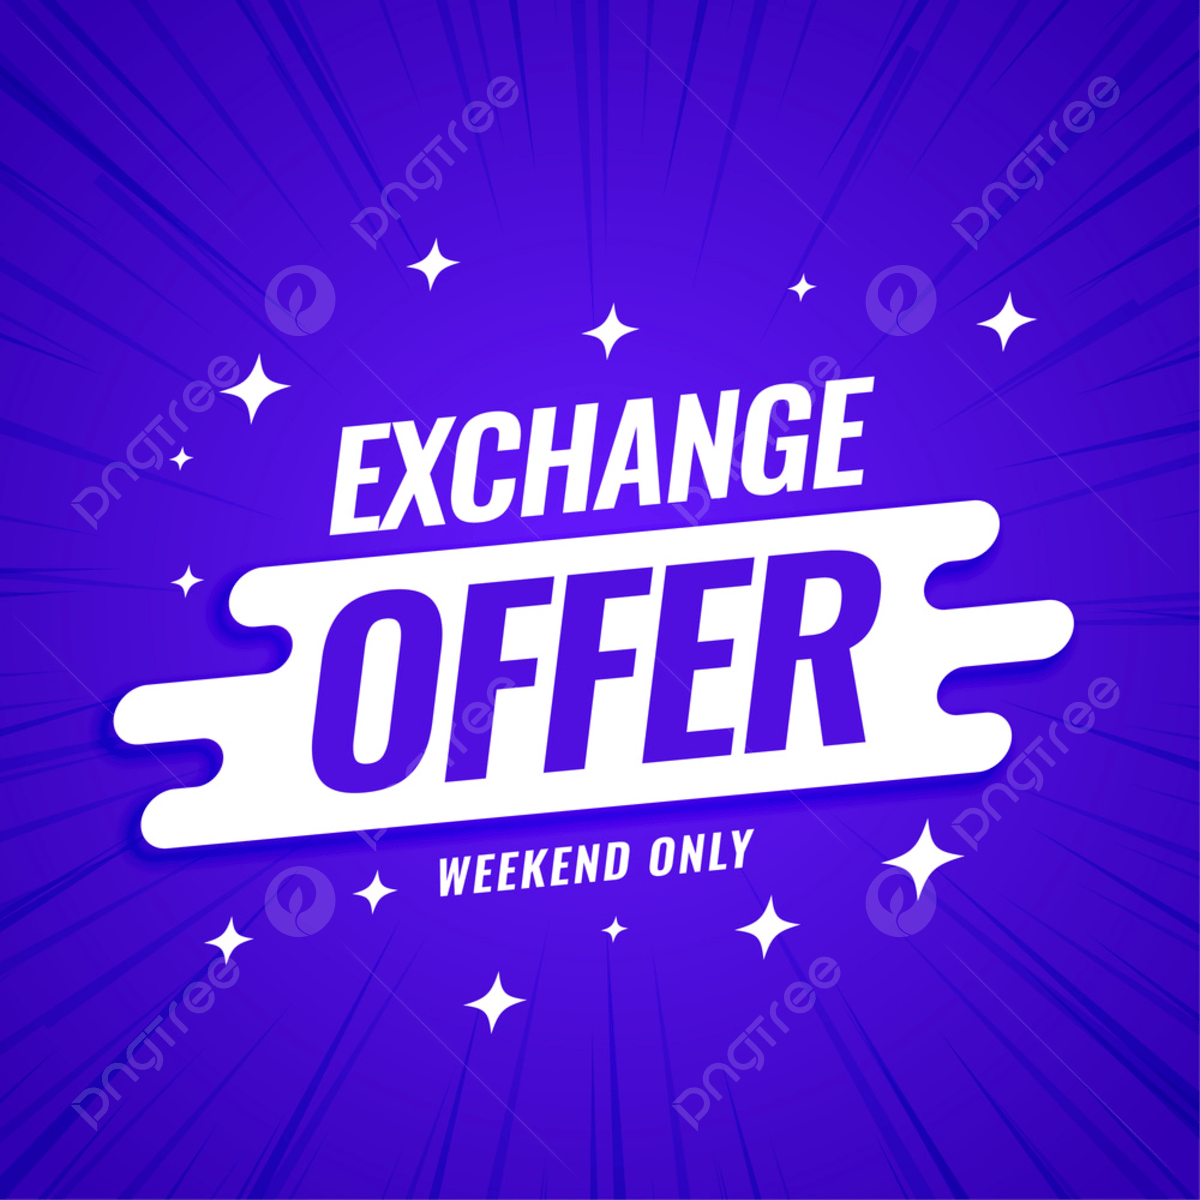 An exchange offer for 3m company